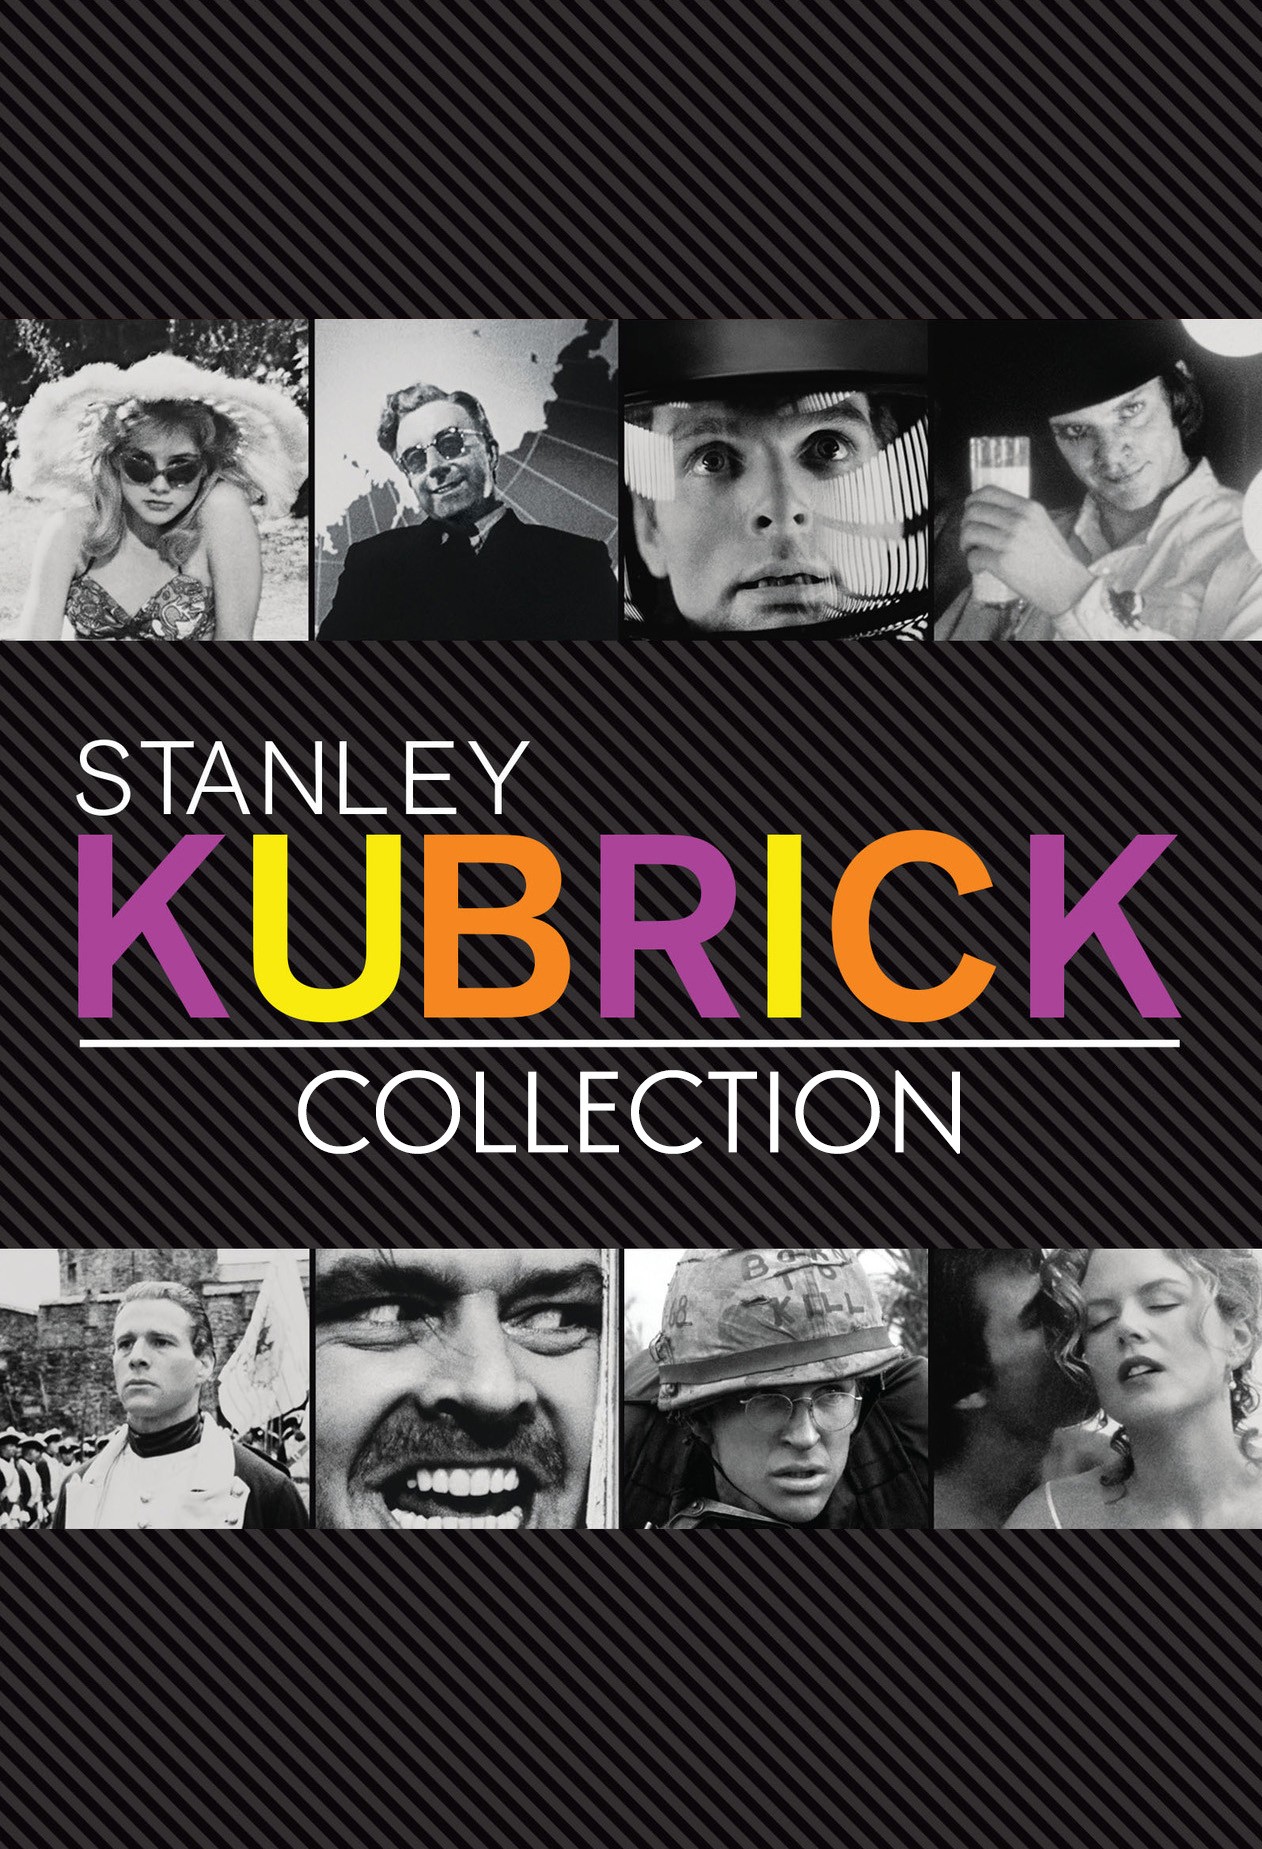 Stanley Kubrick Collection - Plex Collection Posters